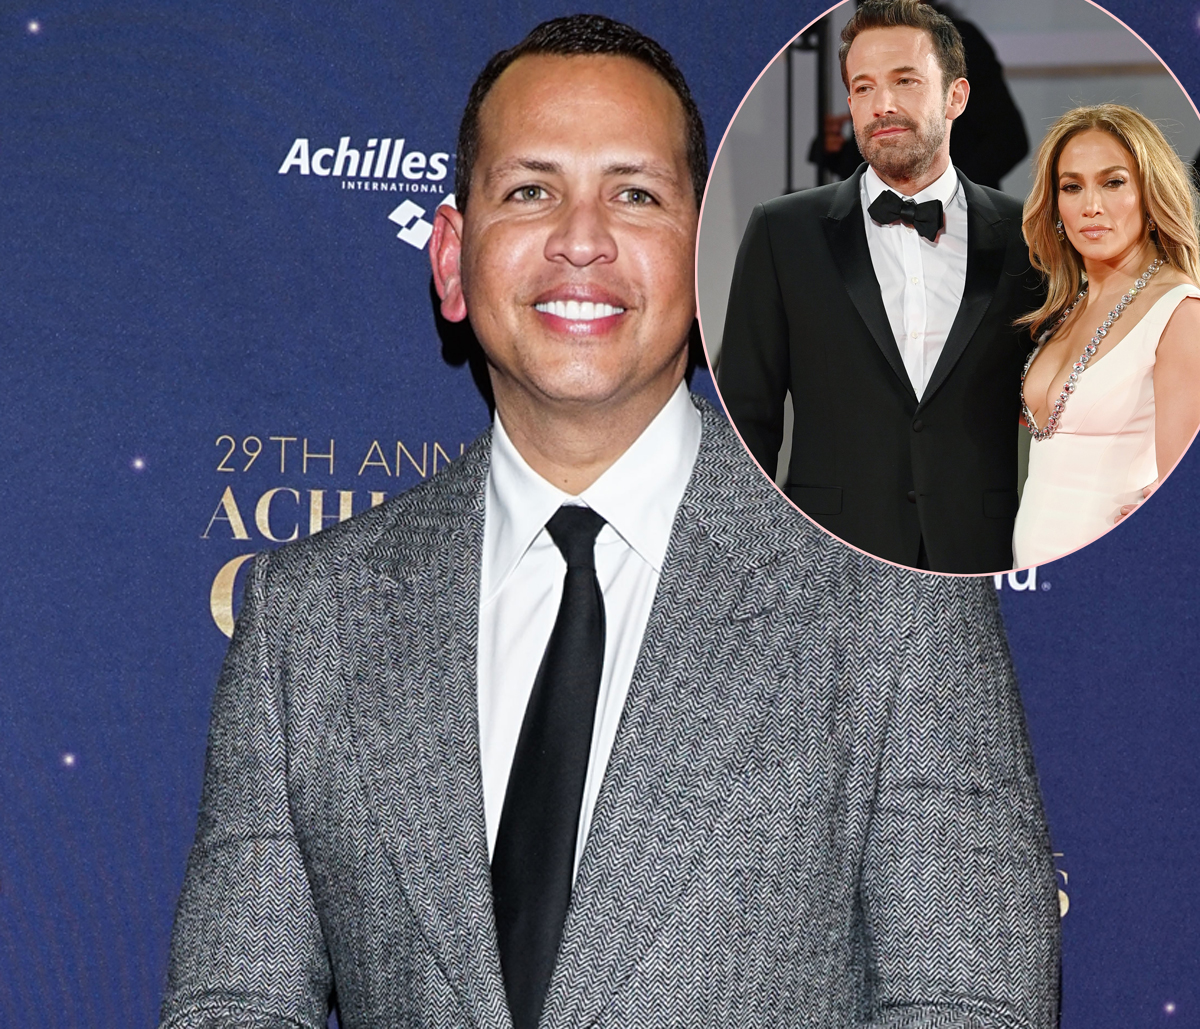 #Alex Rodriguez FINALLY Shares His Thoughts On Ex Jennifer Lopez Marrying Ben Affleck!